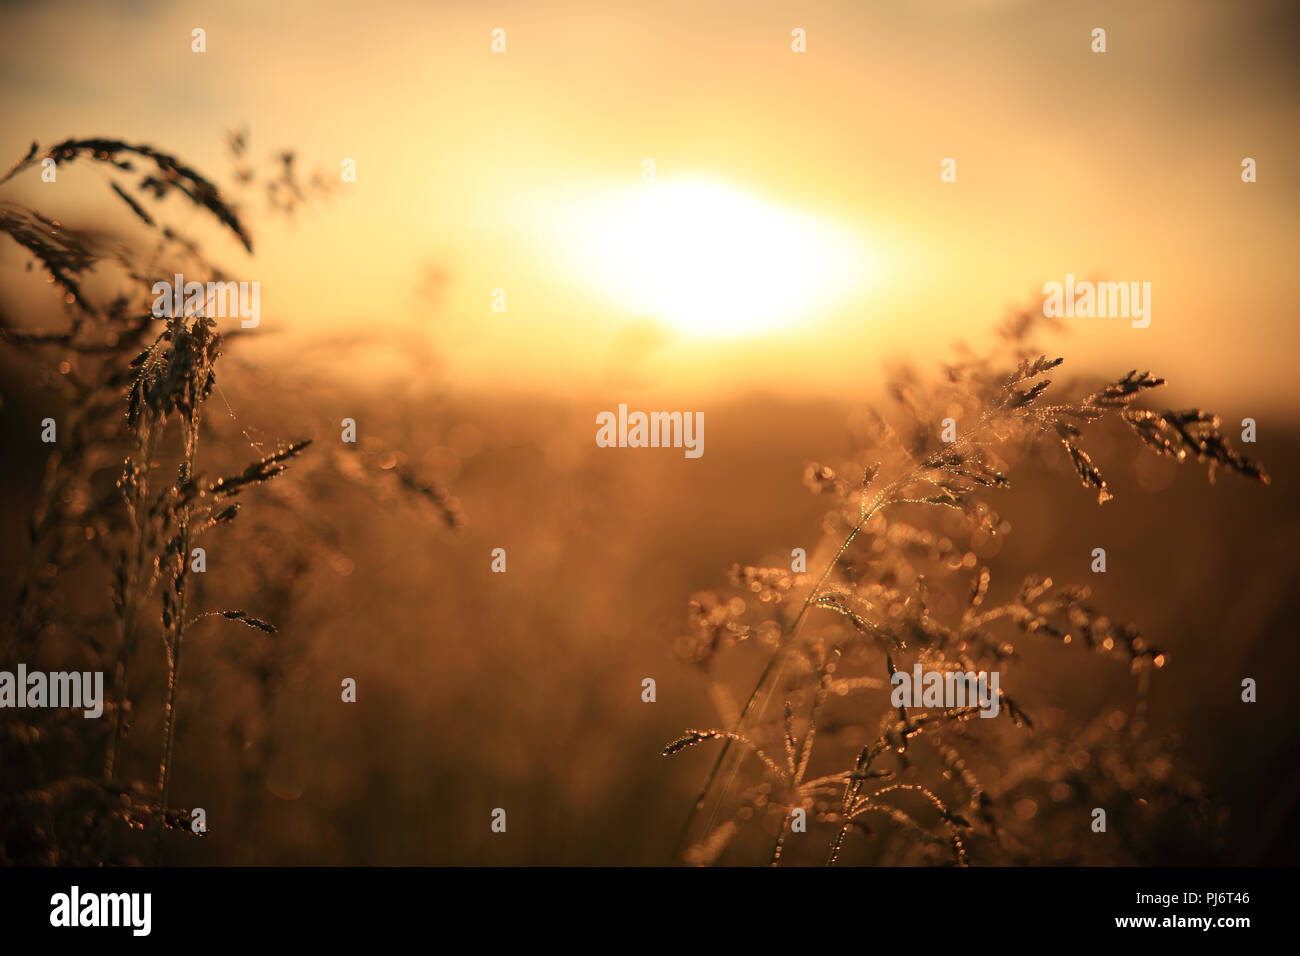 Morning background. Grass on blurred sunny background. Stock Photo